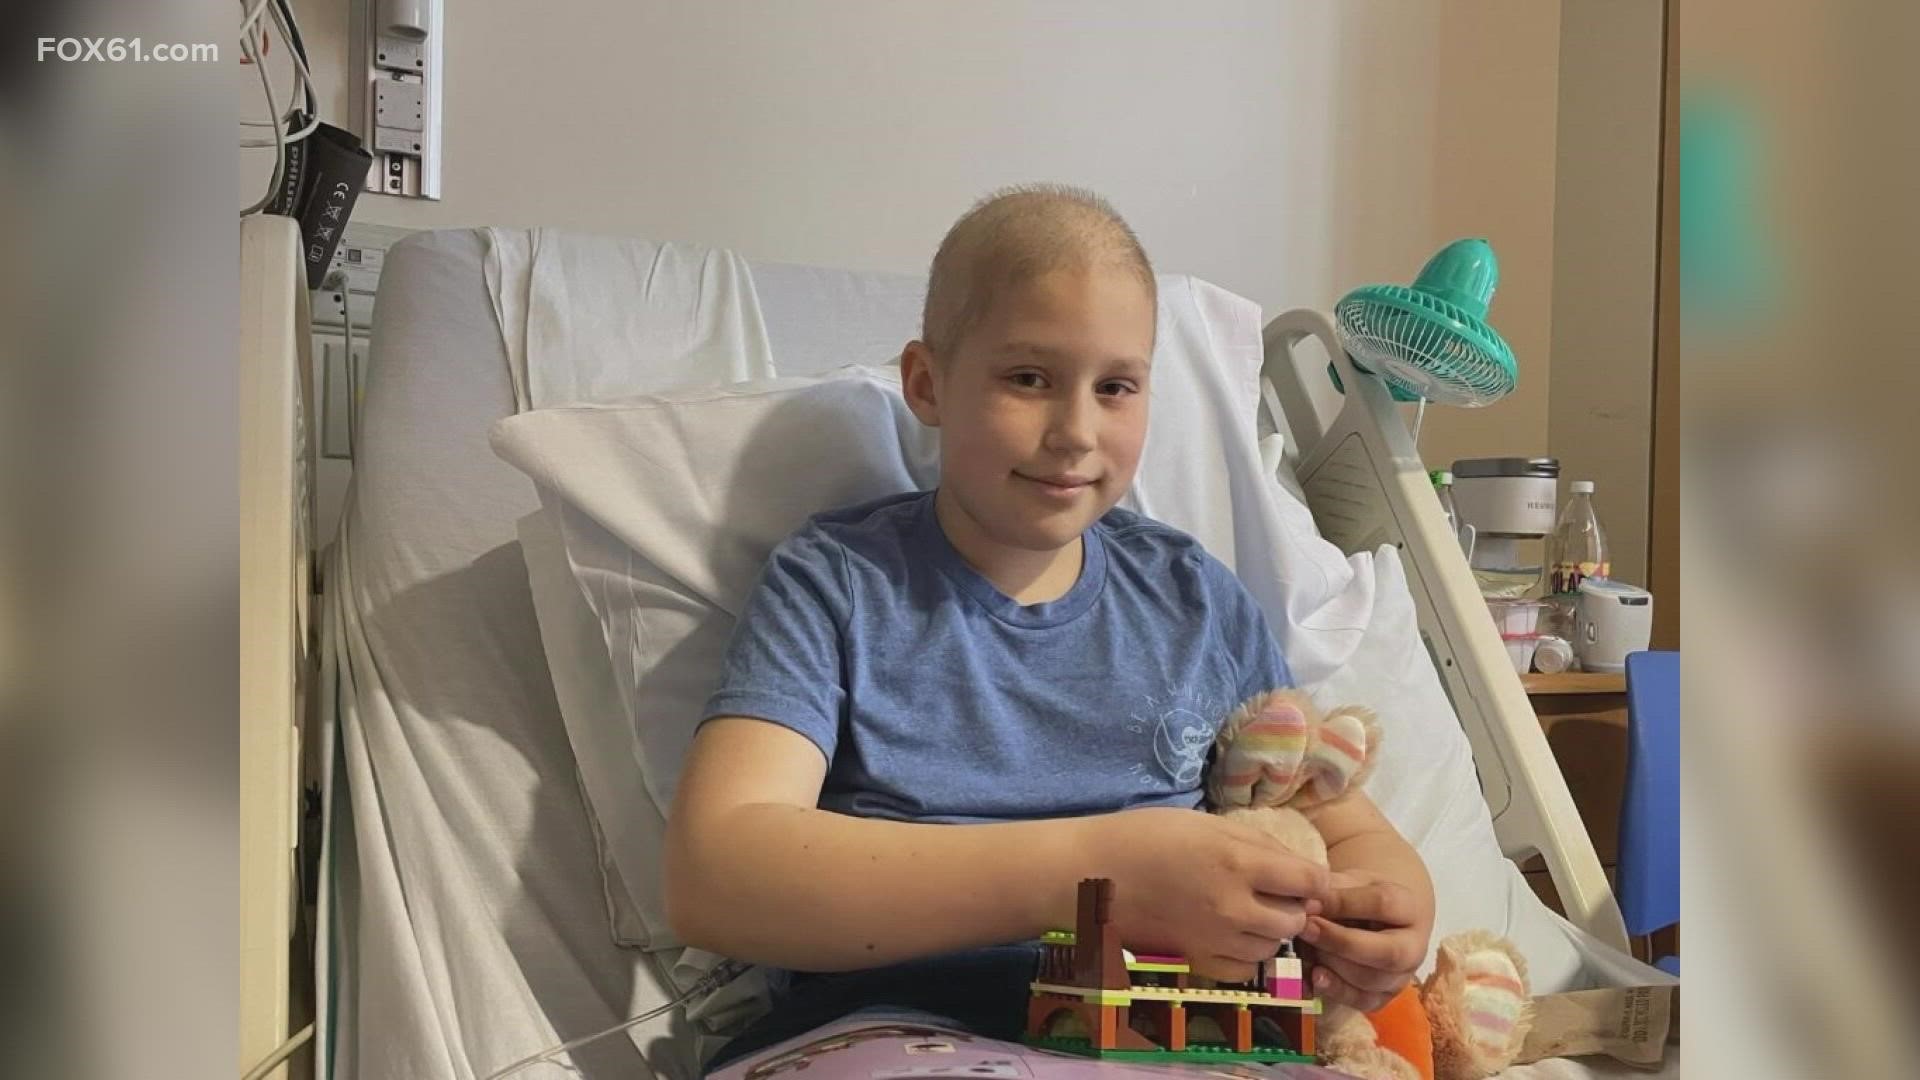 10-year-old Rachel Webster's friends, fellow students, teachers, and community are supporting her as she fights a rare form of cancer.